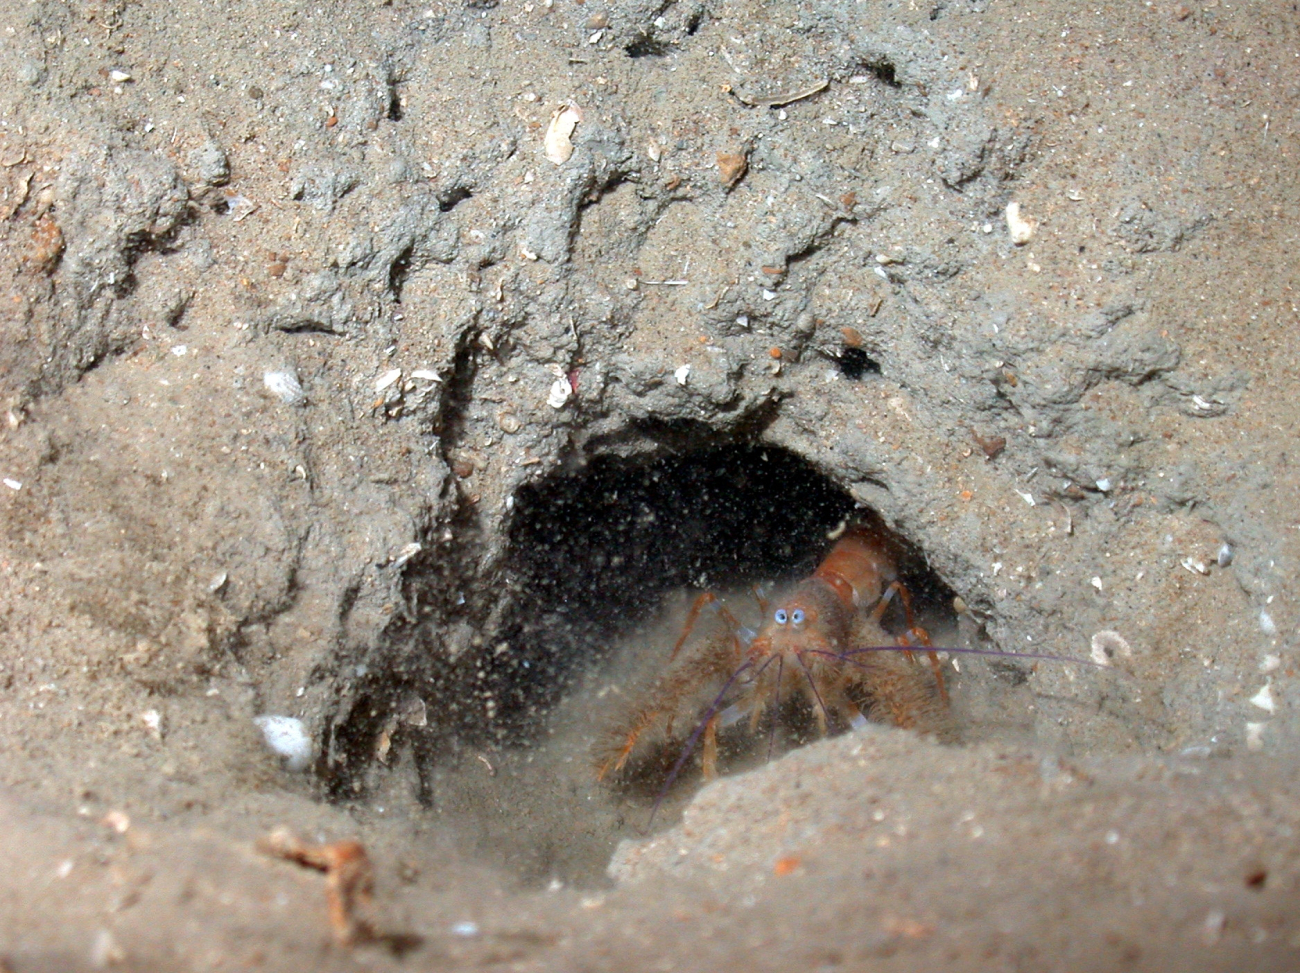 A blind furry lobster in its burrow